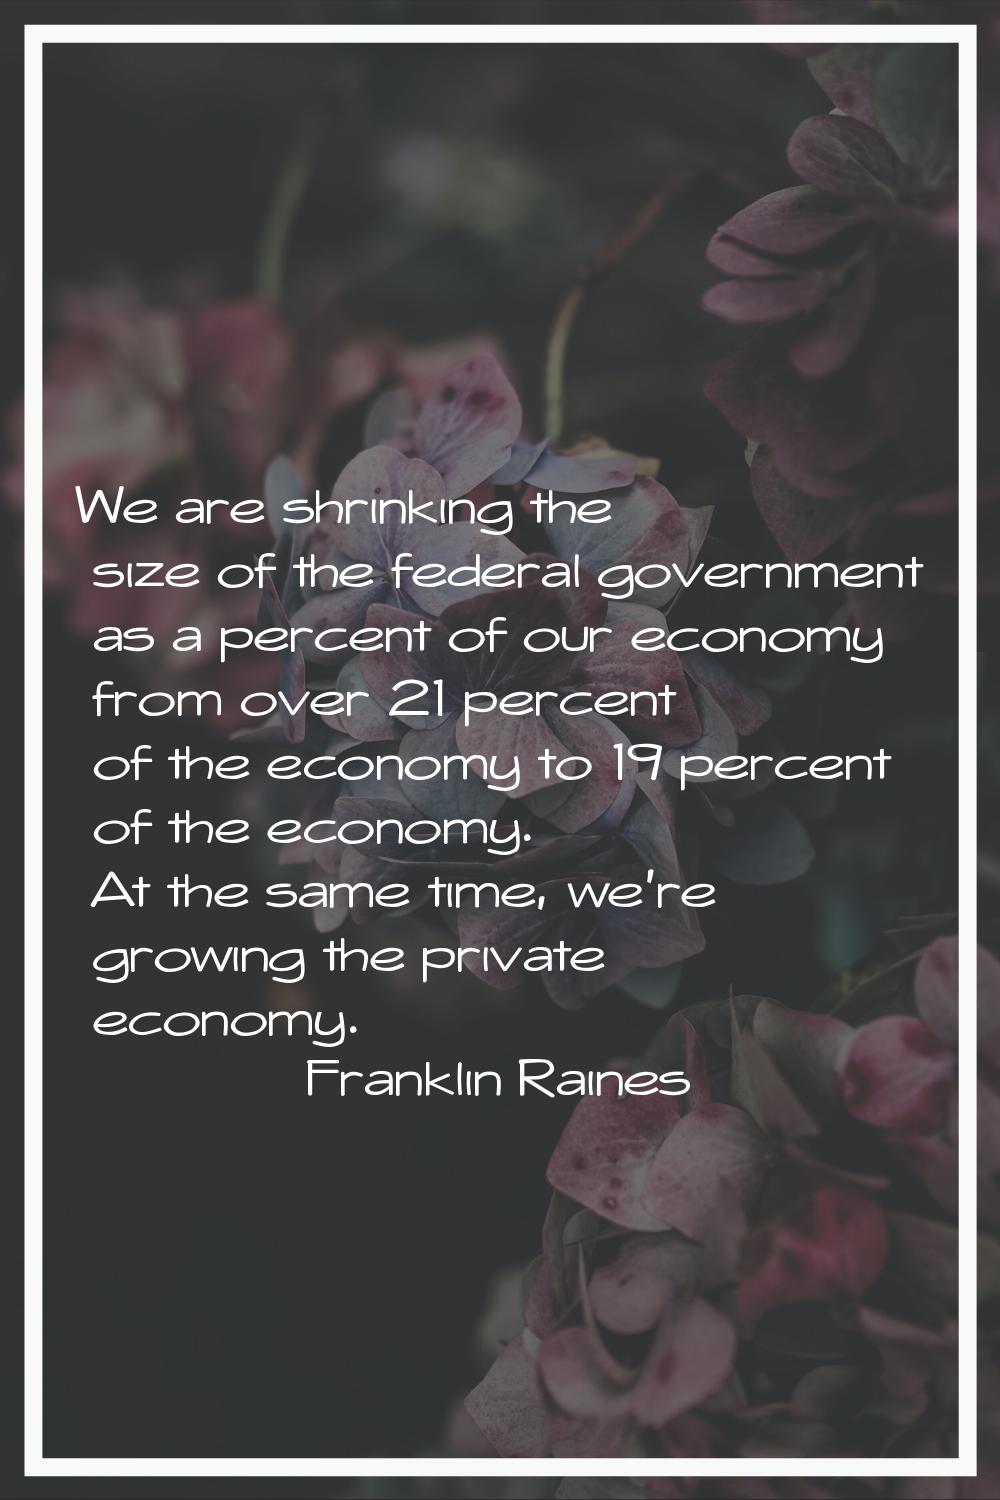 We are shrinking the size of the federal government as a percent of our economy from over 21 percen